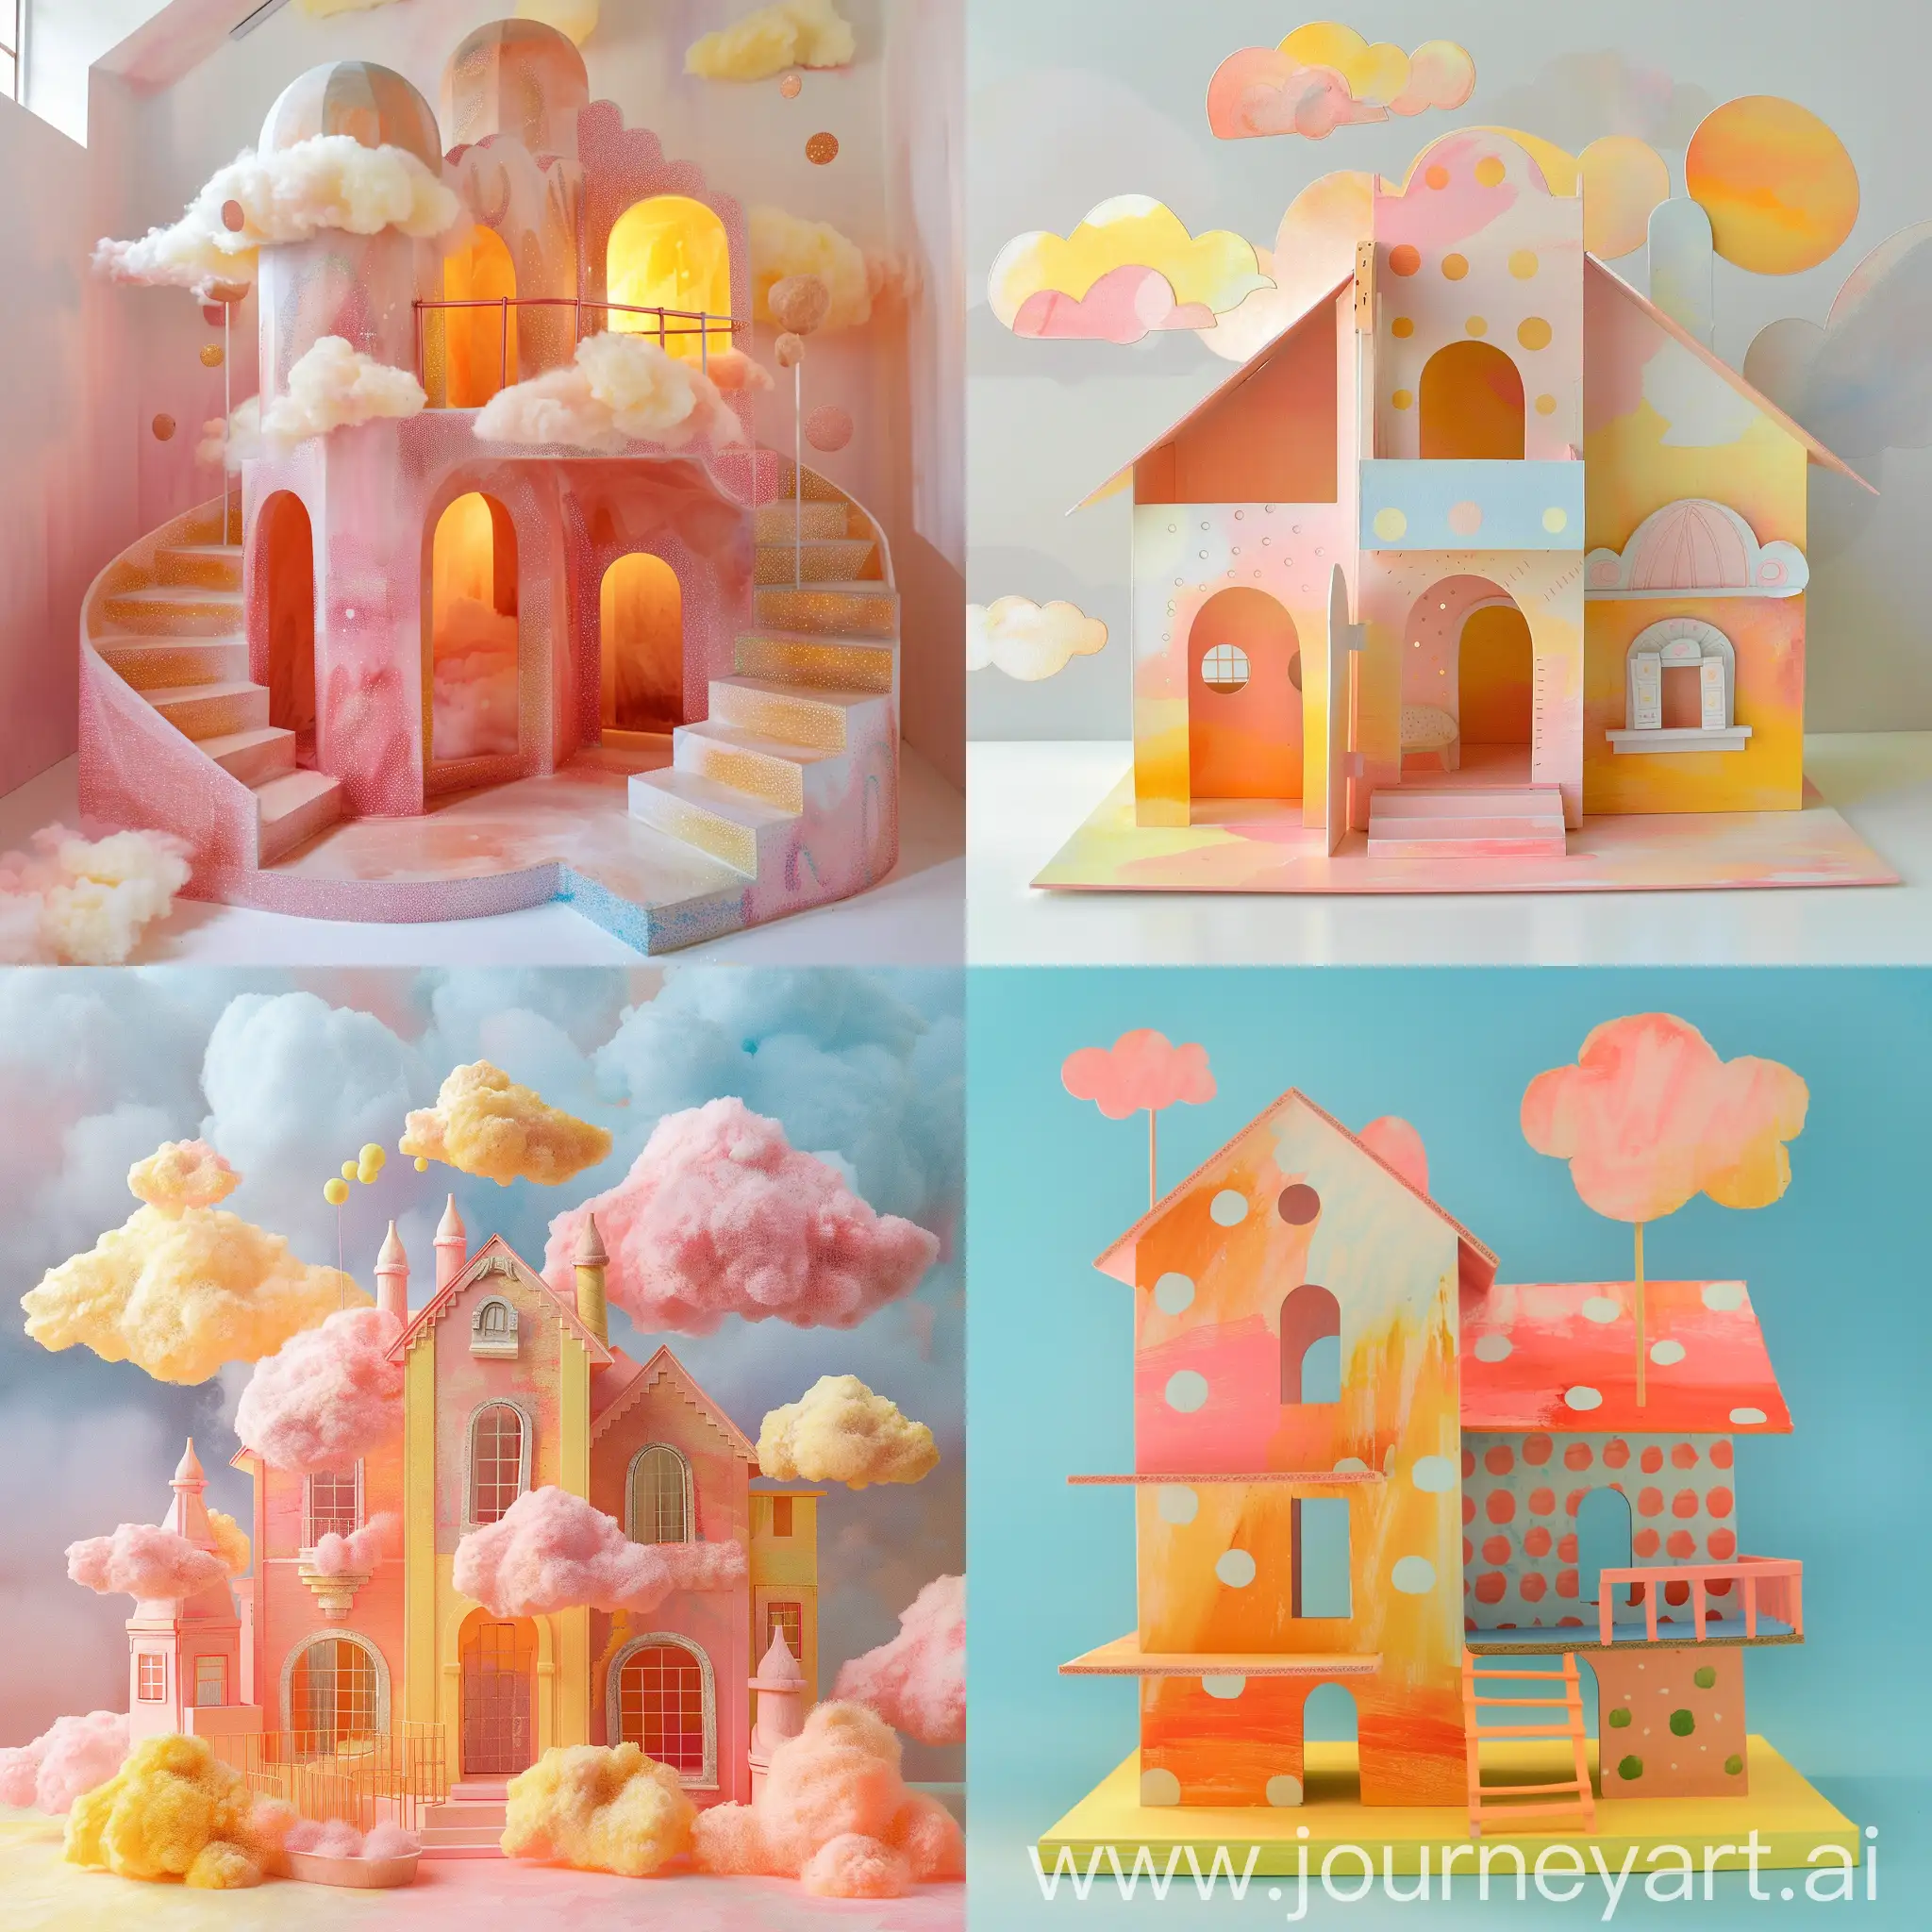 Dreamy-Dollhouse-Among-Soft-Pastel-Clouds-and-Dots